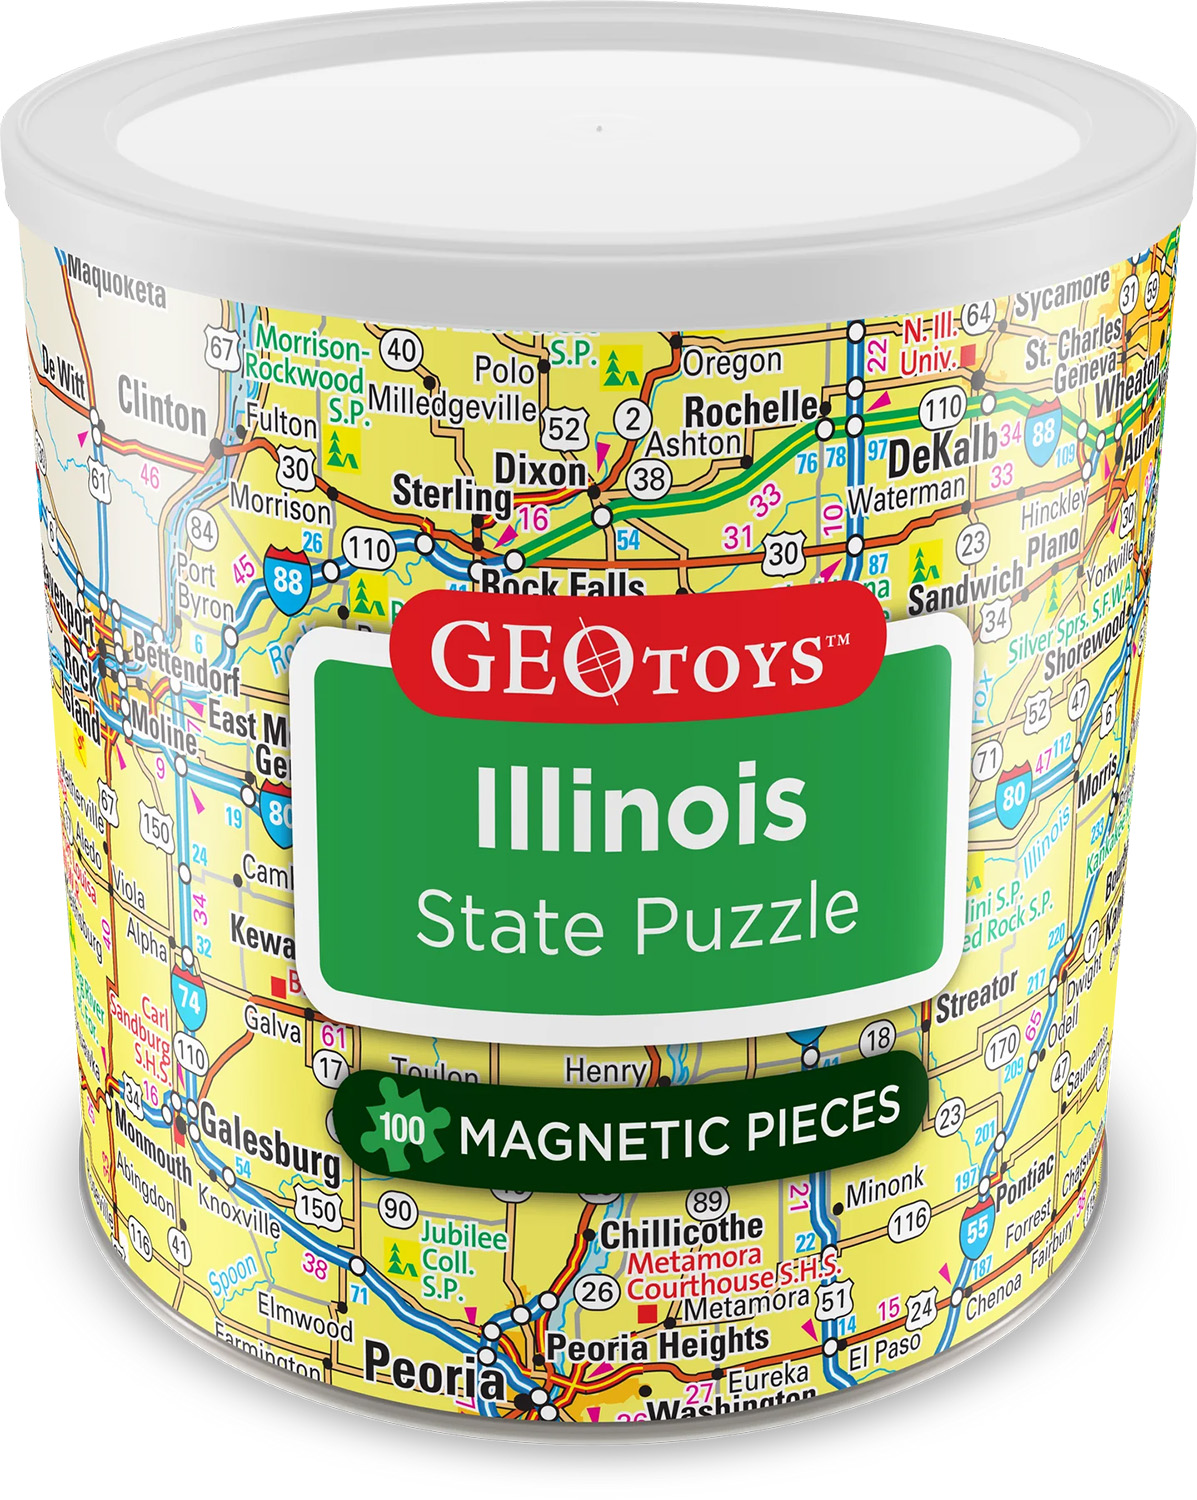 Illinois - Magnetic Puzzle Maps & Geography Jigsaw Puzzle